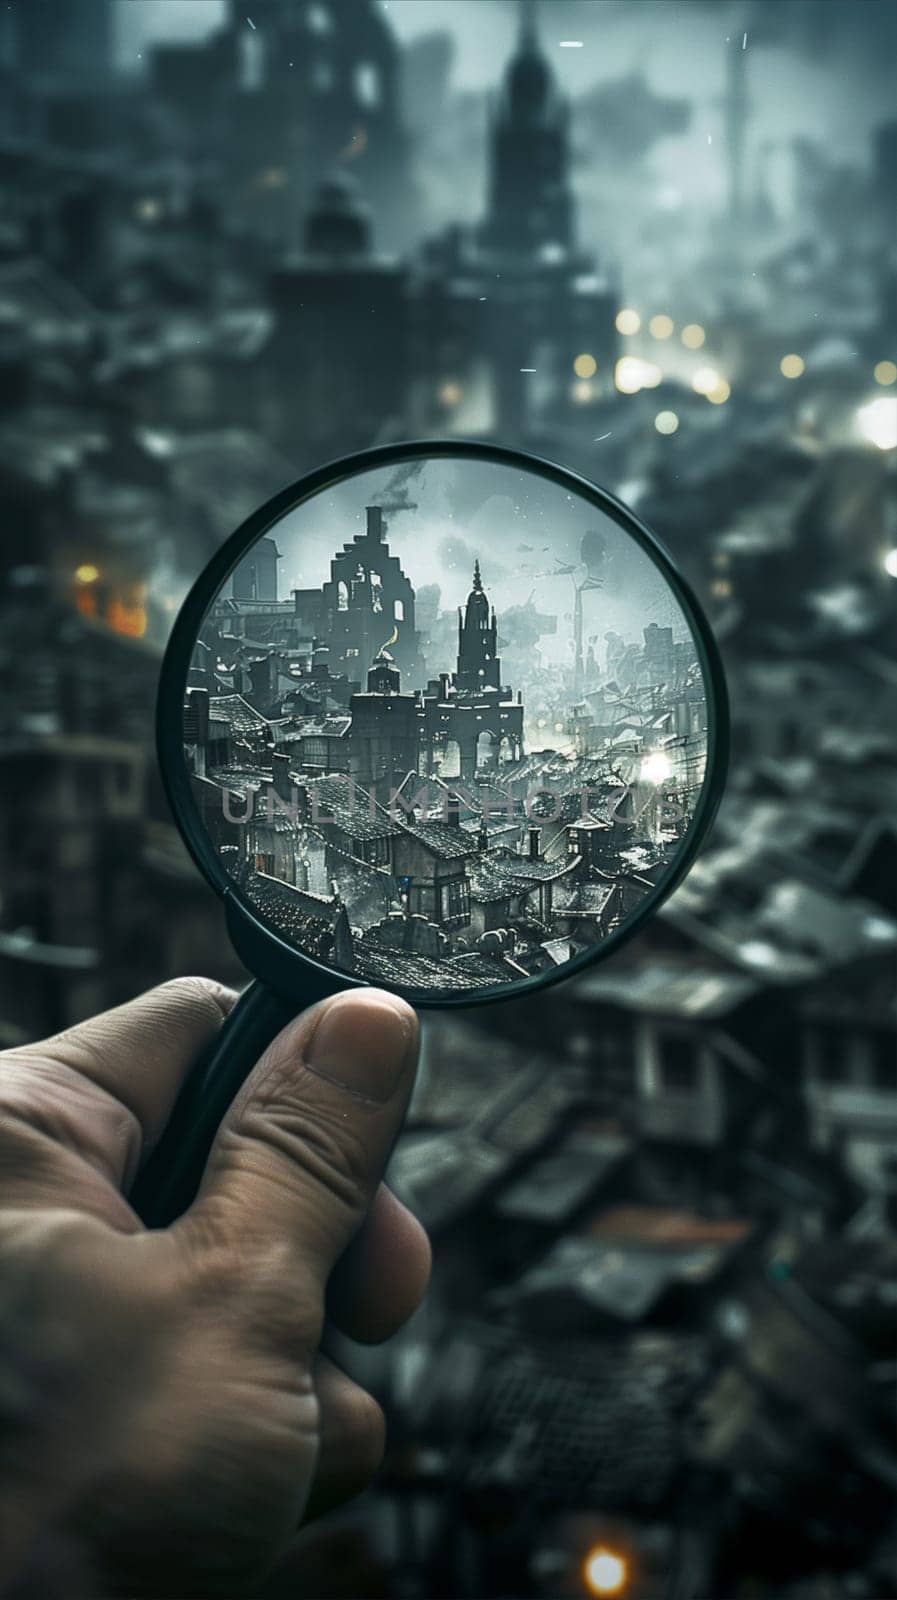 A hand holds a magnifying glass over a city, focusing on details and landmarks. The magnifying glass provides a closer look at the urban landscape below.